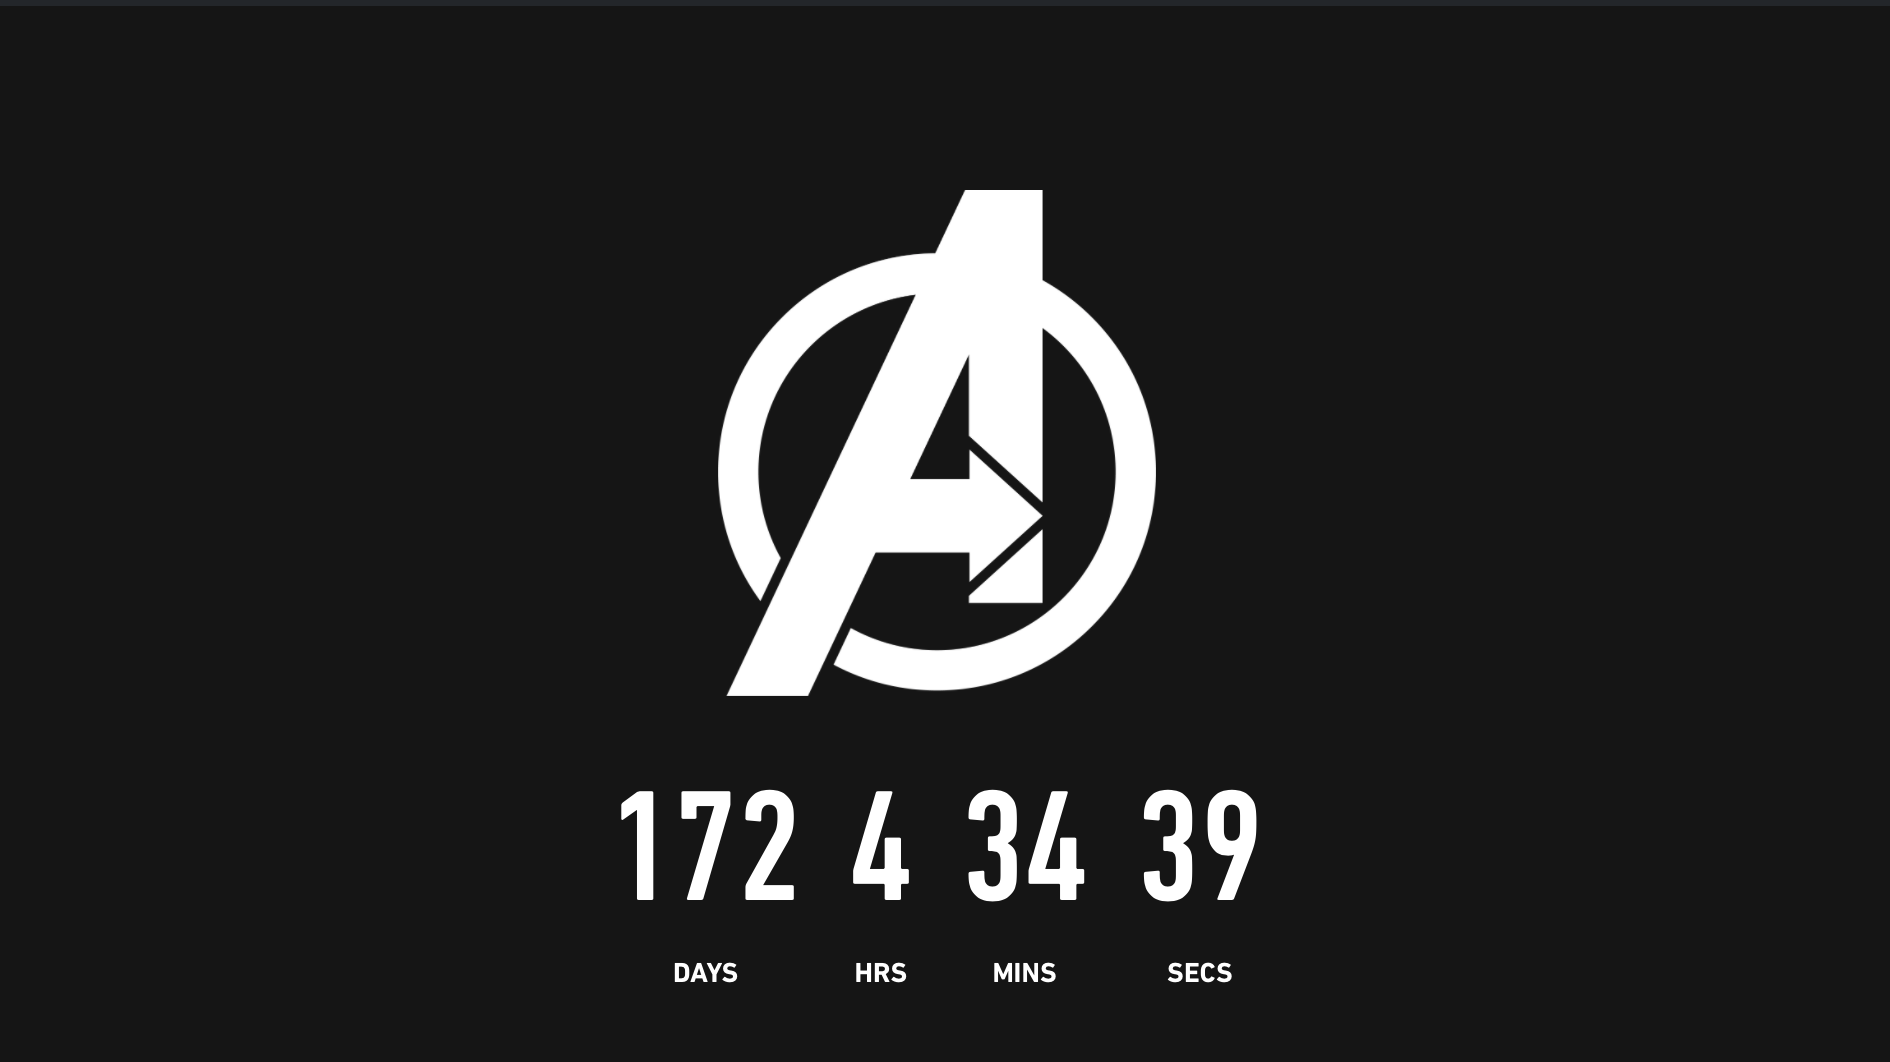 2 For 2, Marvel Launches An Avengers Countdown Clock